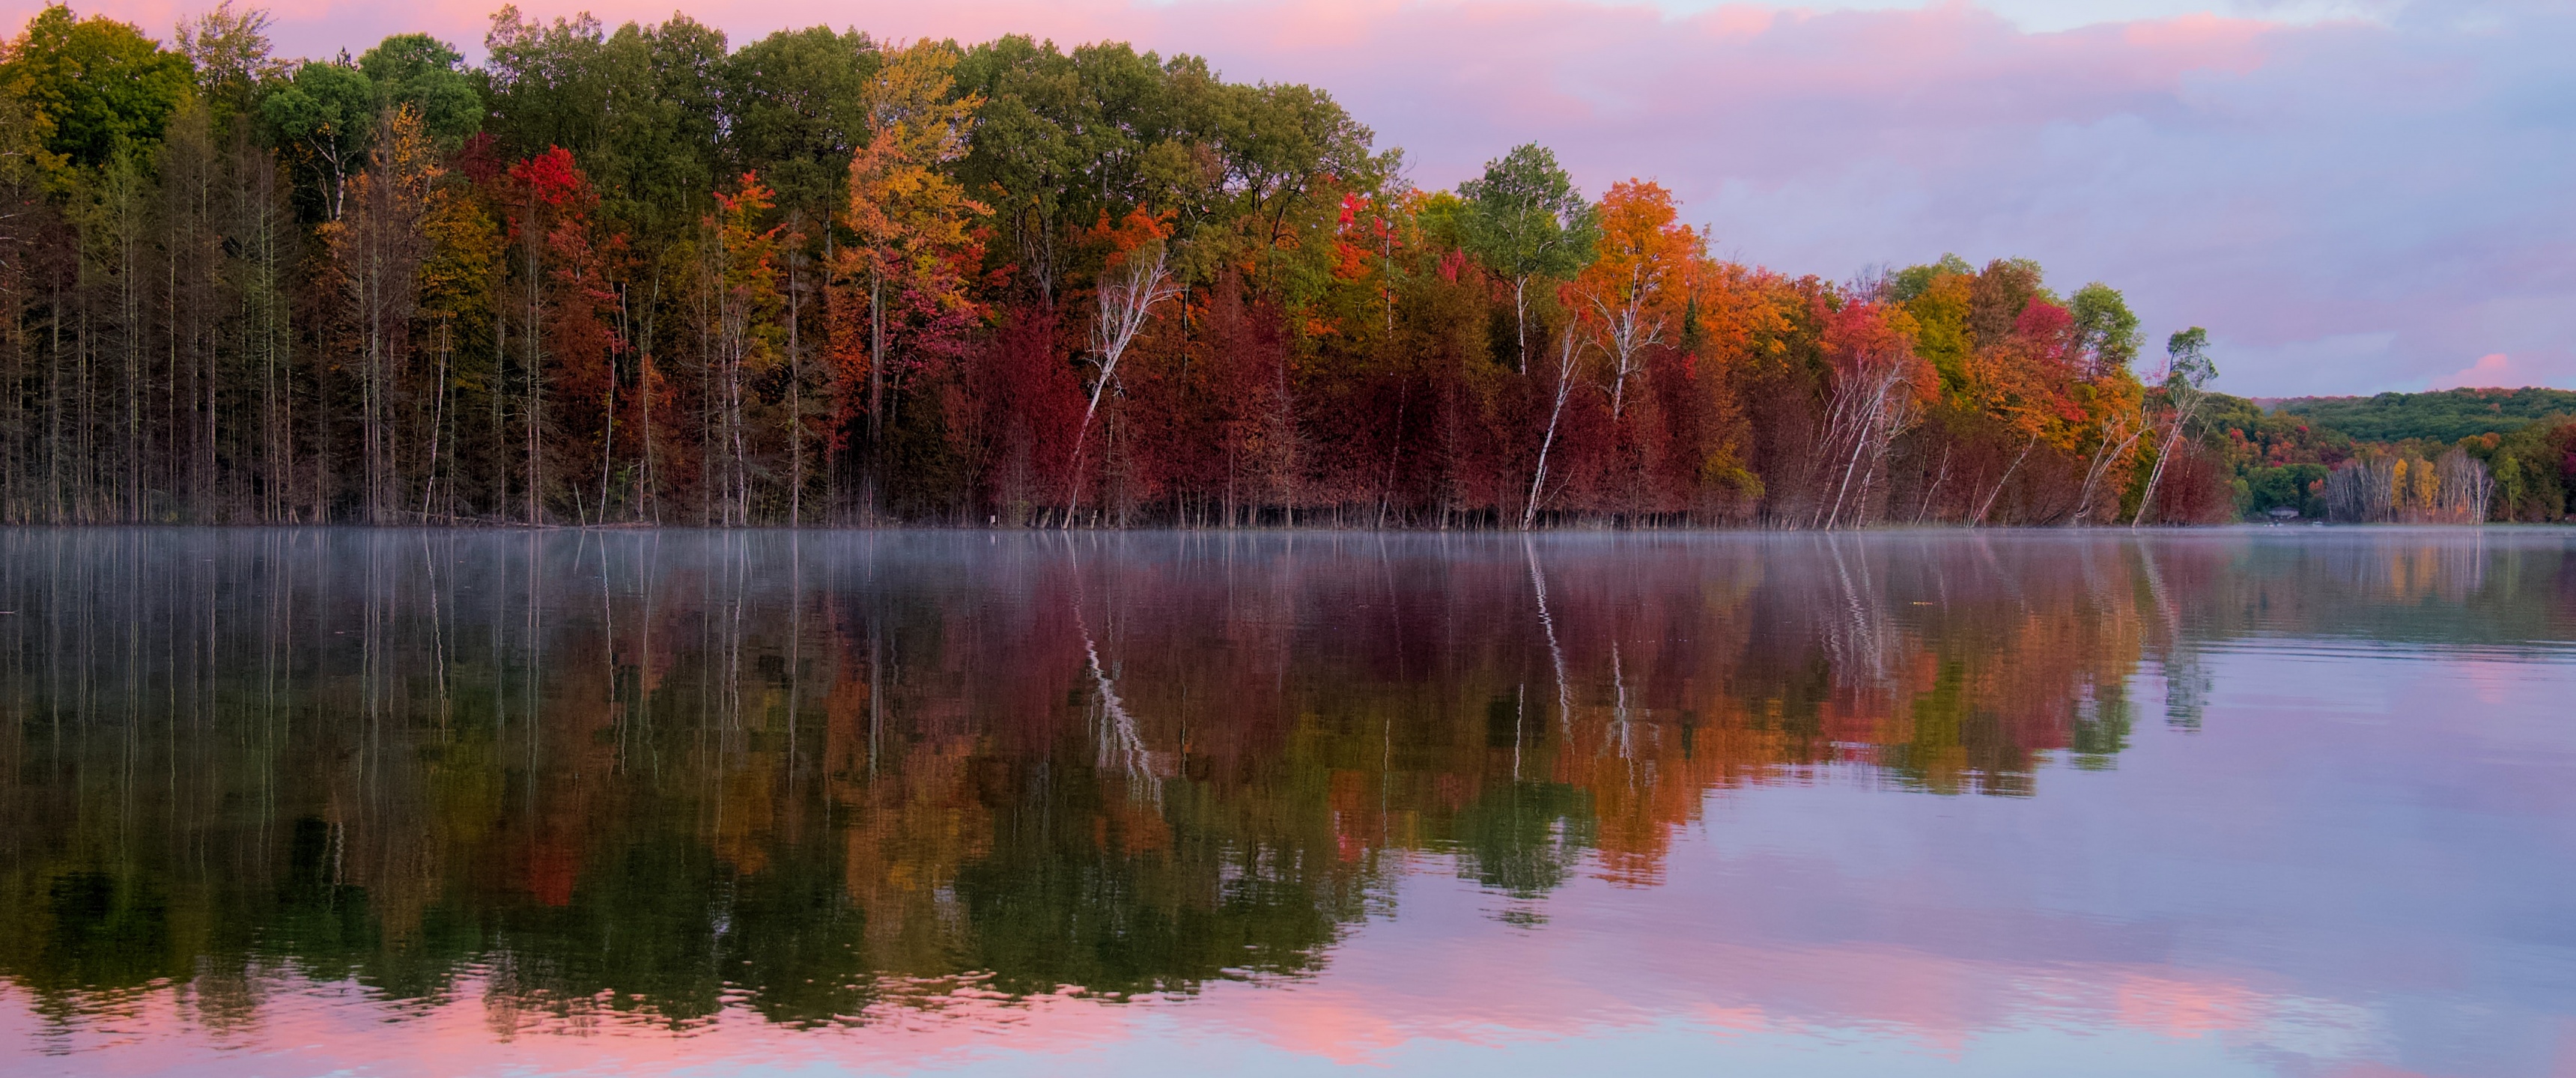 Autumn trees Wallpaper 4K, Forest, Body of Water, Reflection, Lake, Nature